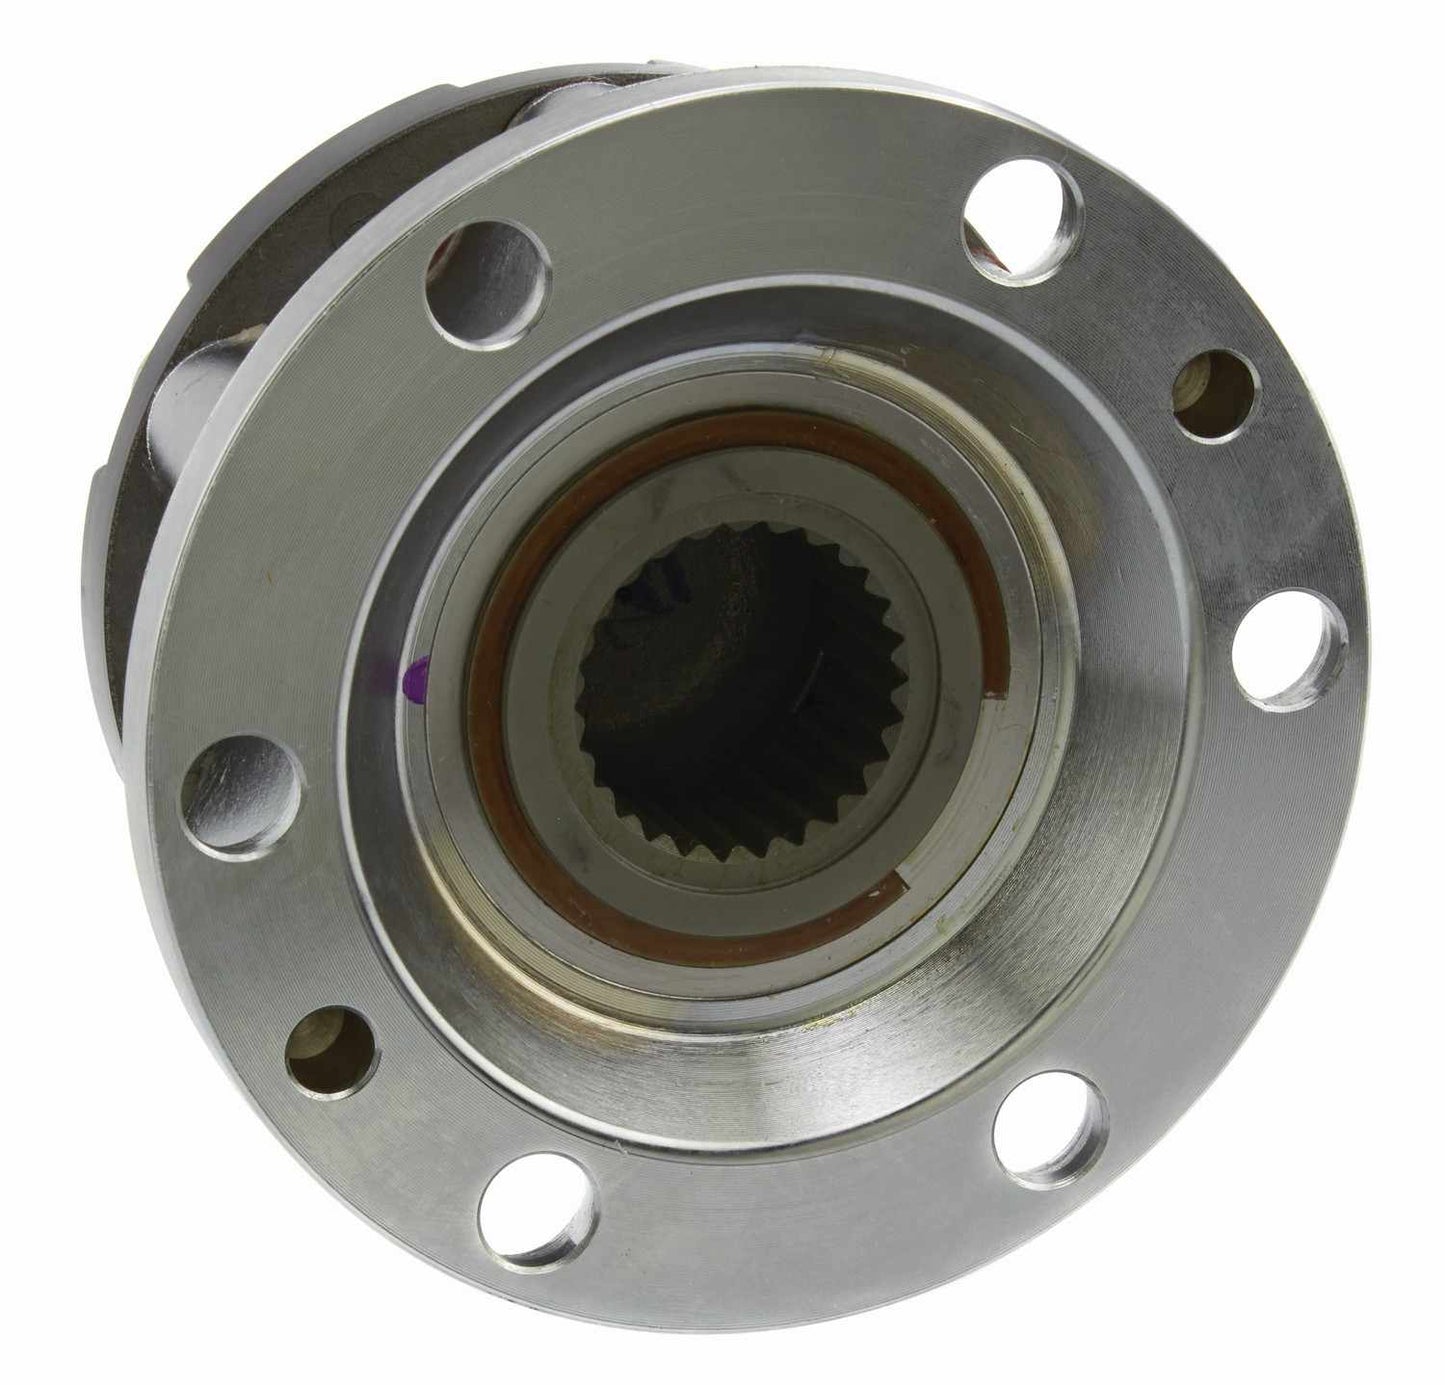 Back View of Locking Hub AISIN FHT-018